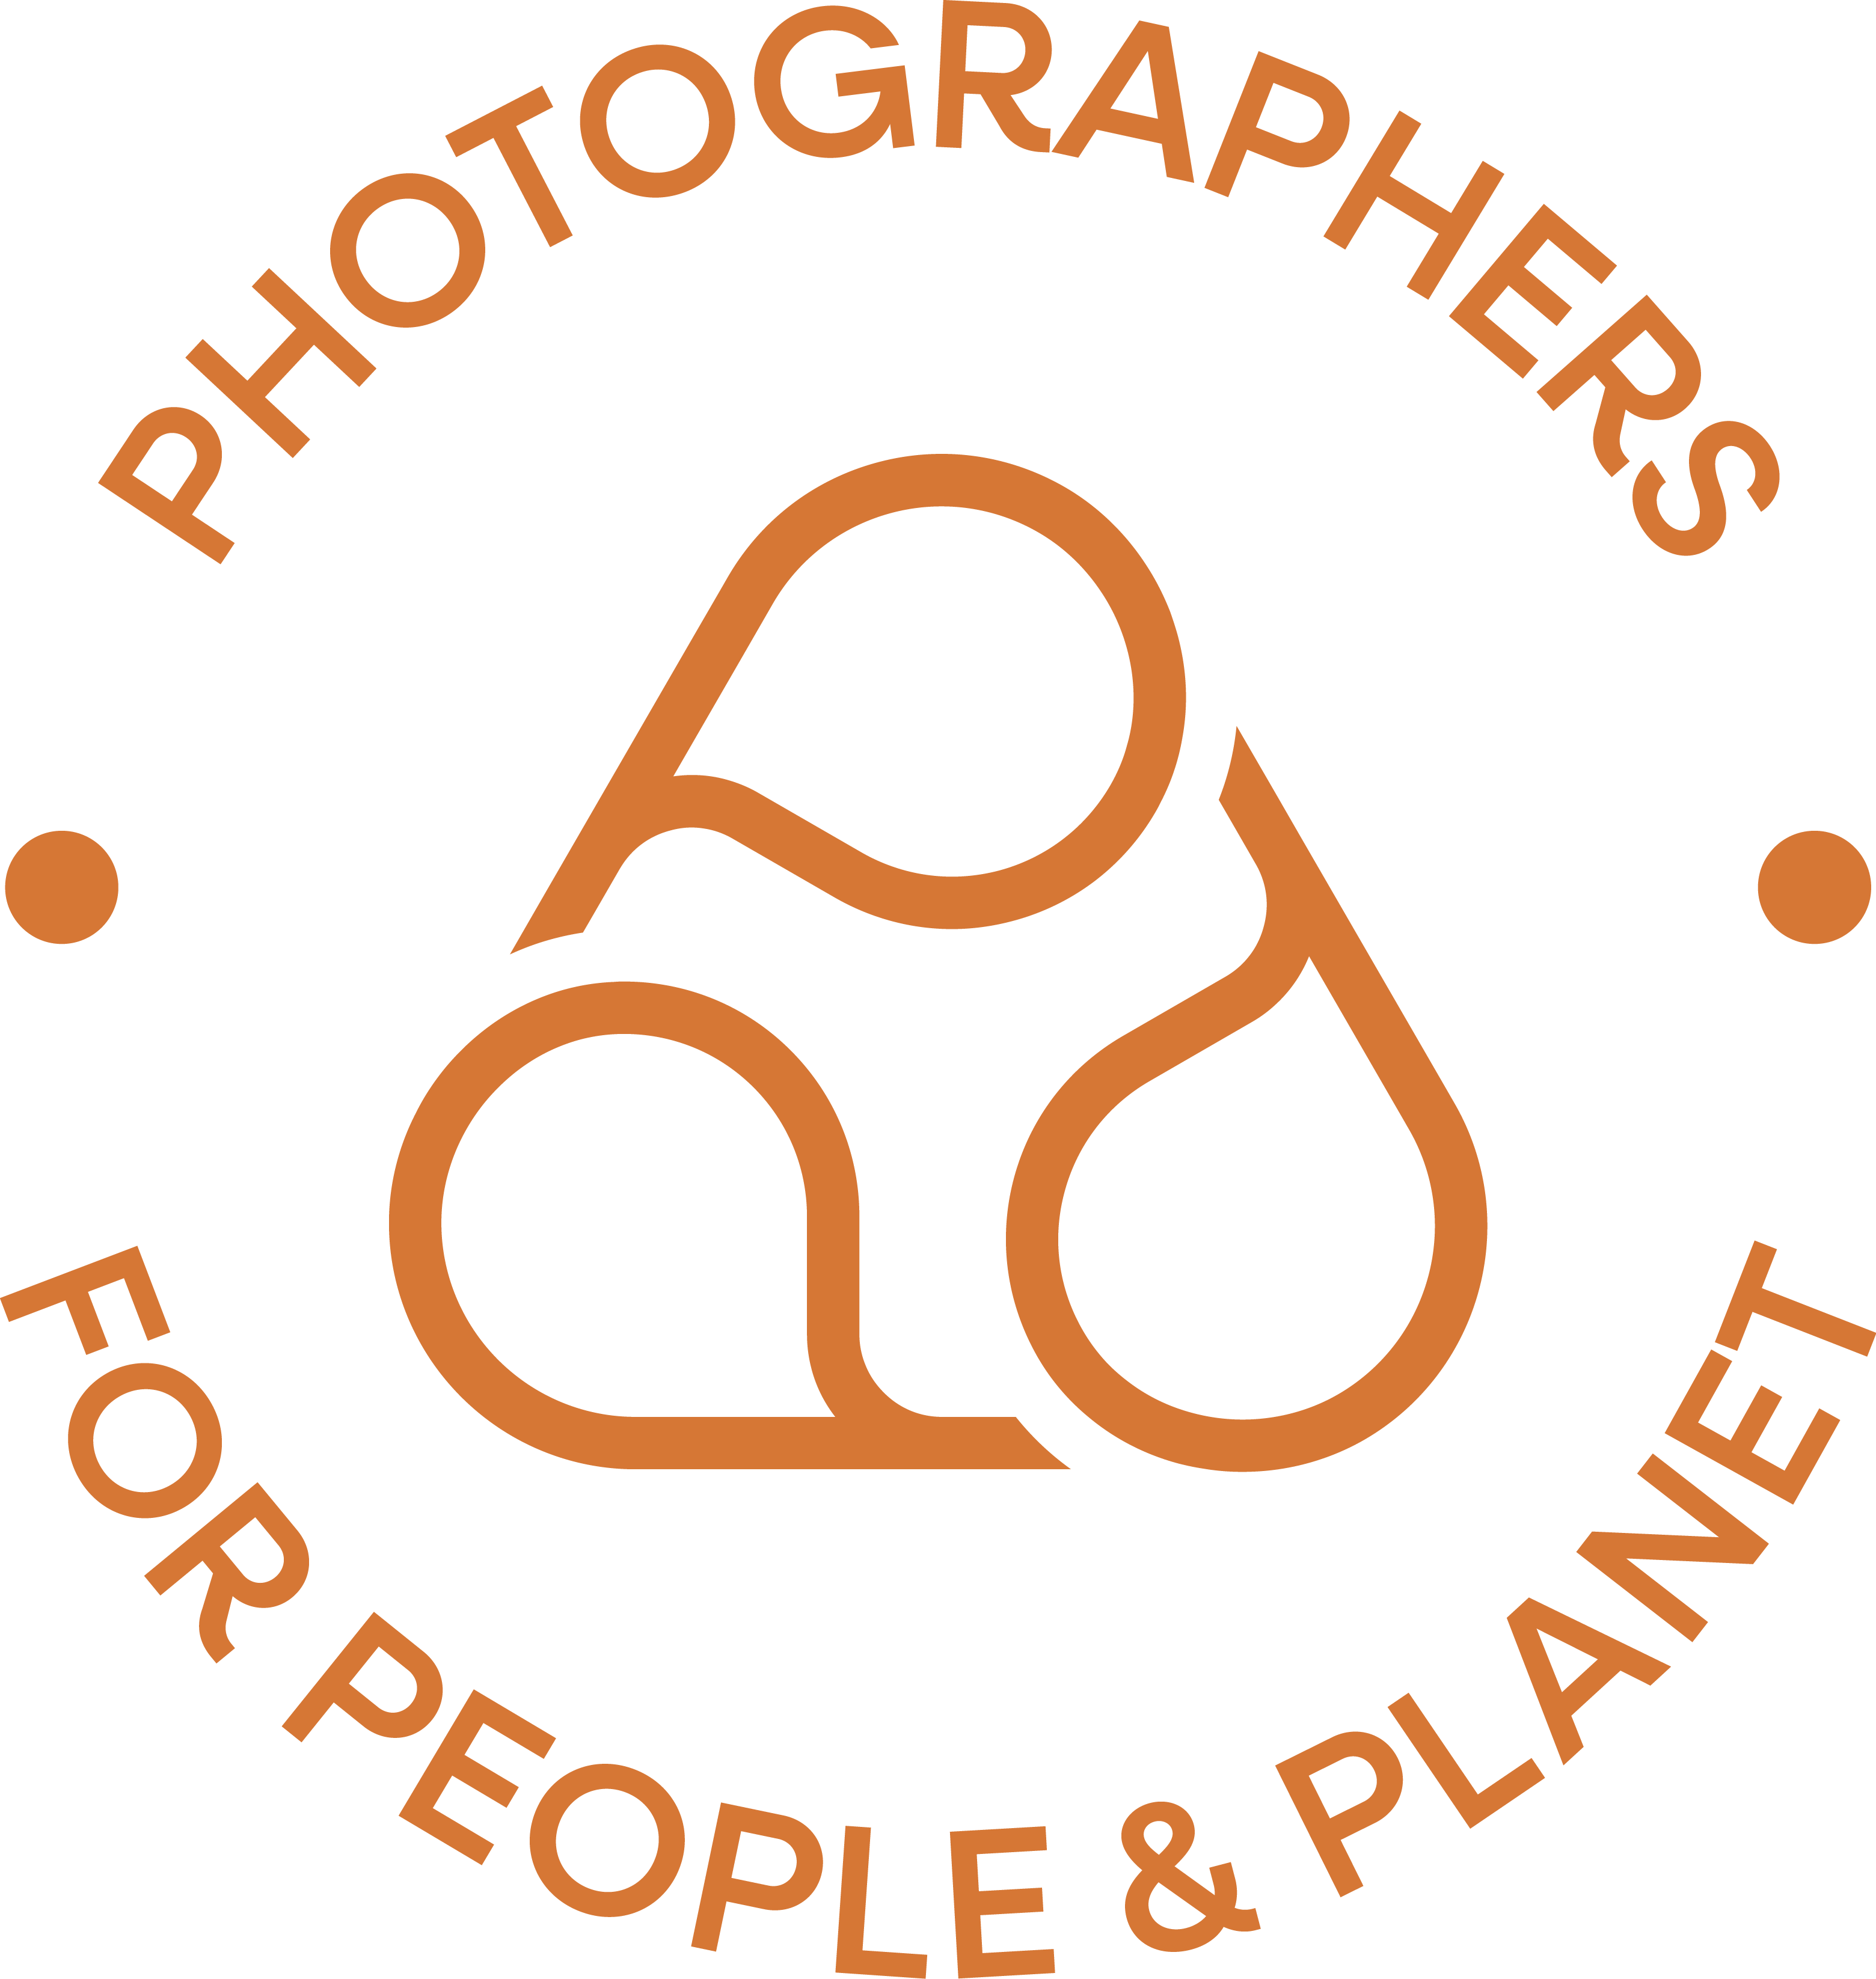 Photographers for people & planet logo